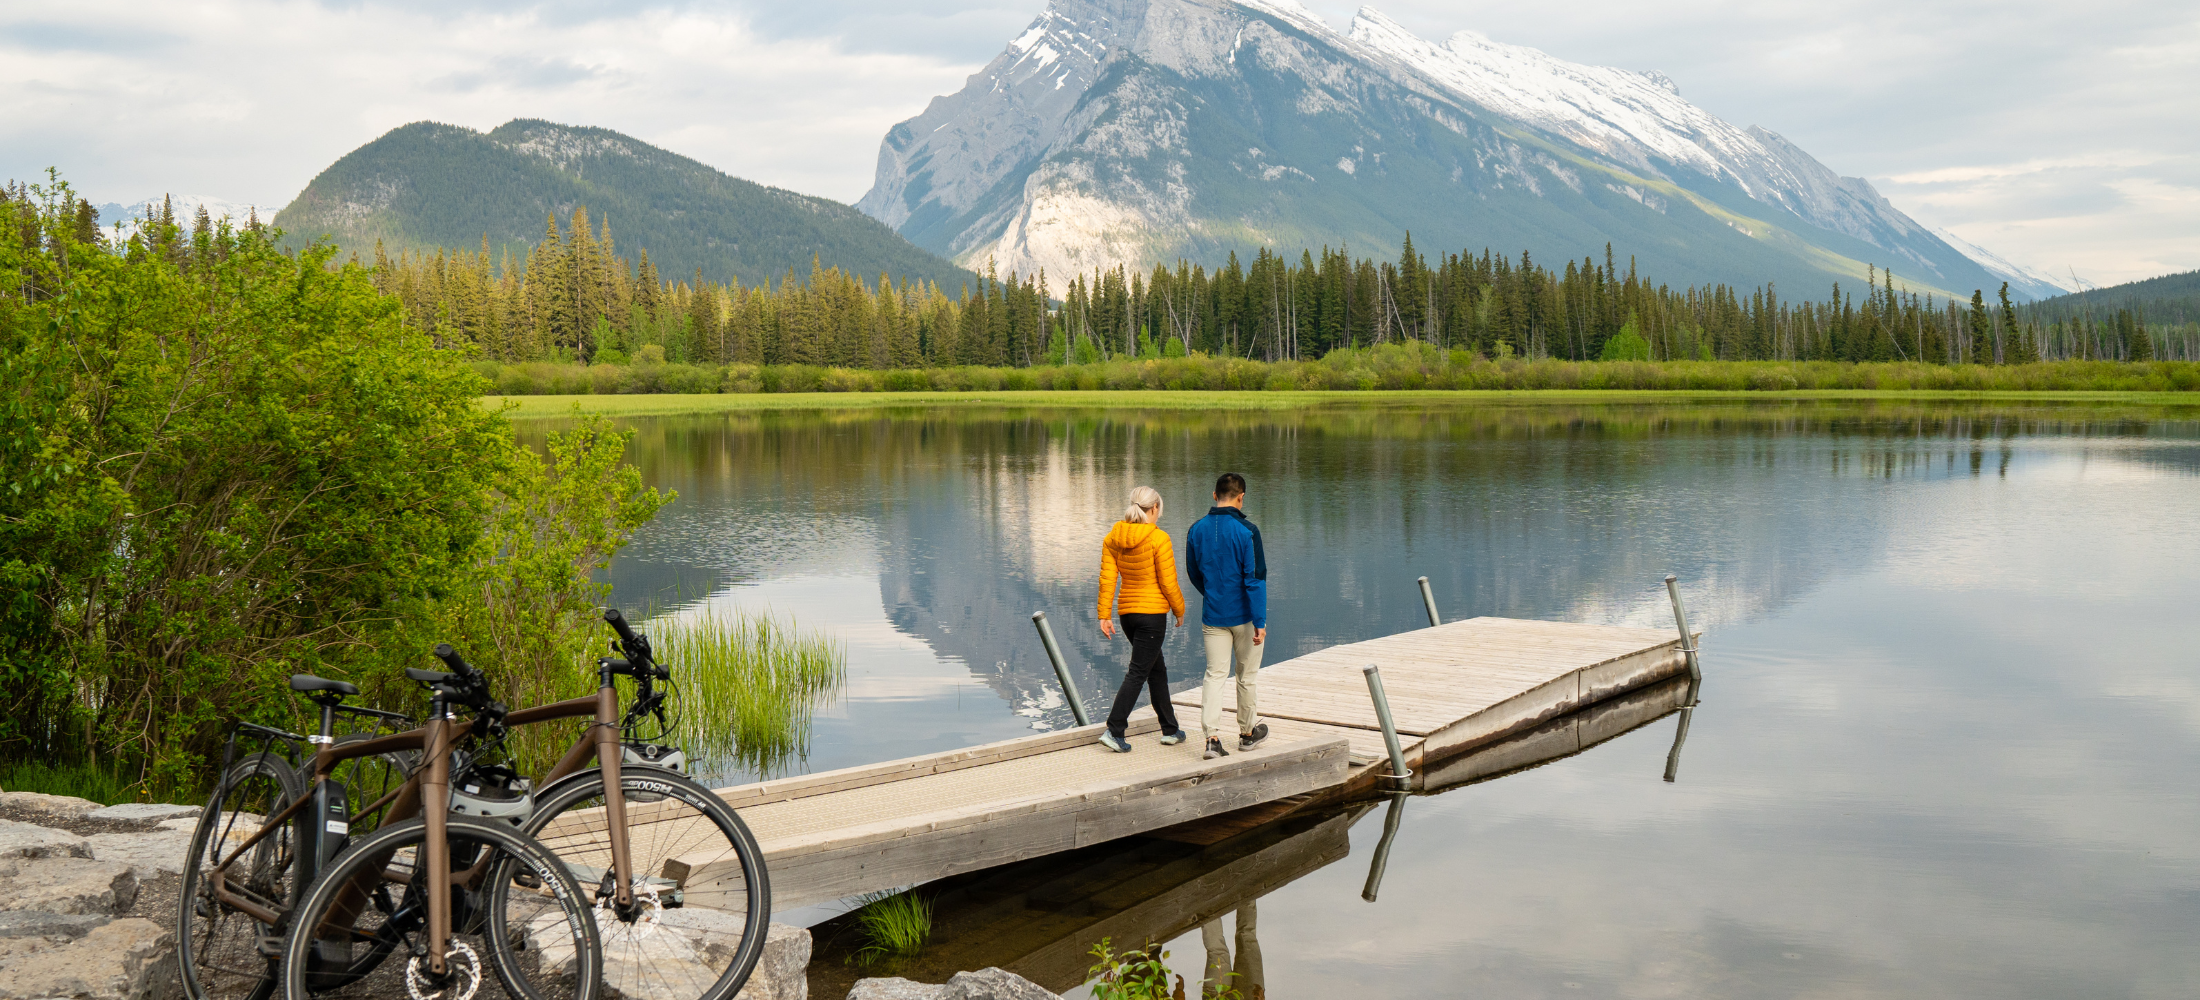 A couple at Vermillion Lakes Dock in Banff National Park. Photo by Travel Alberta / ROAM Creative